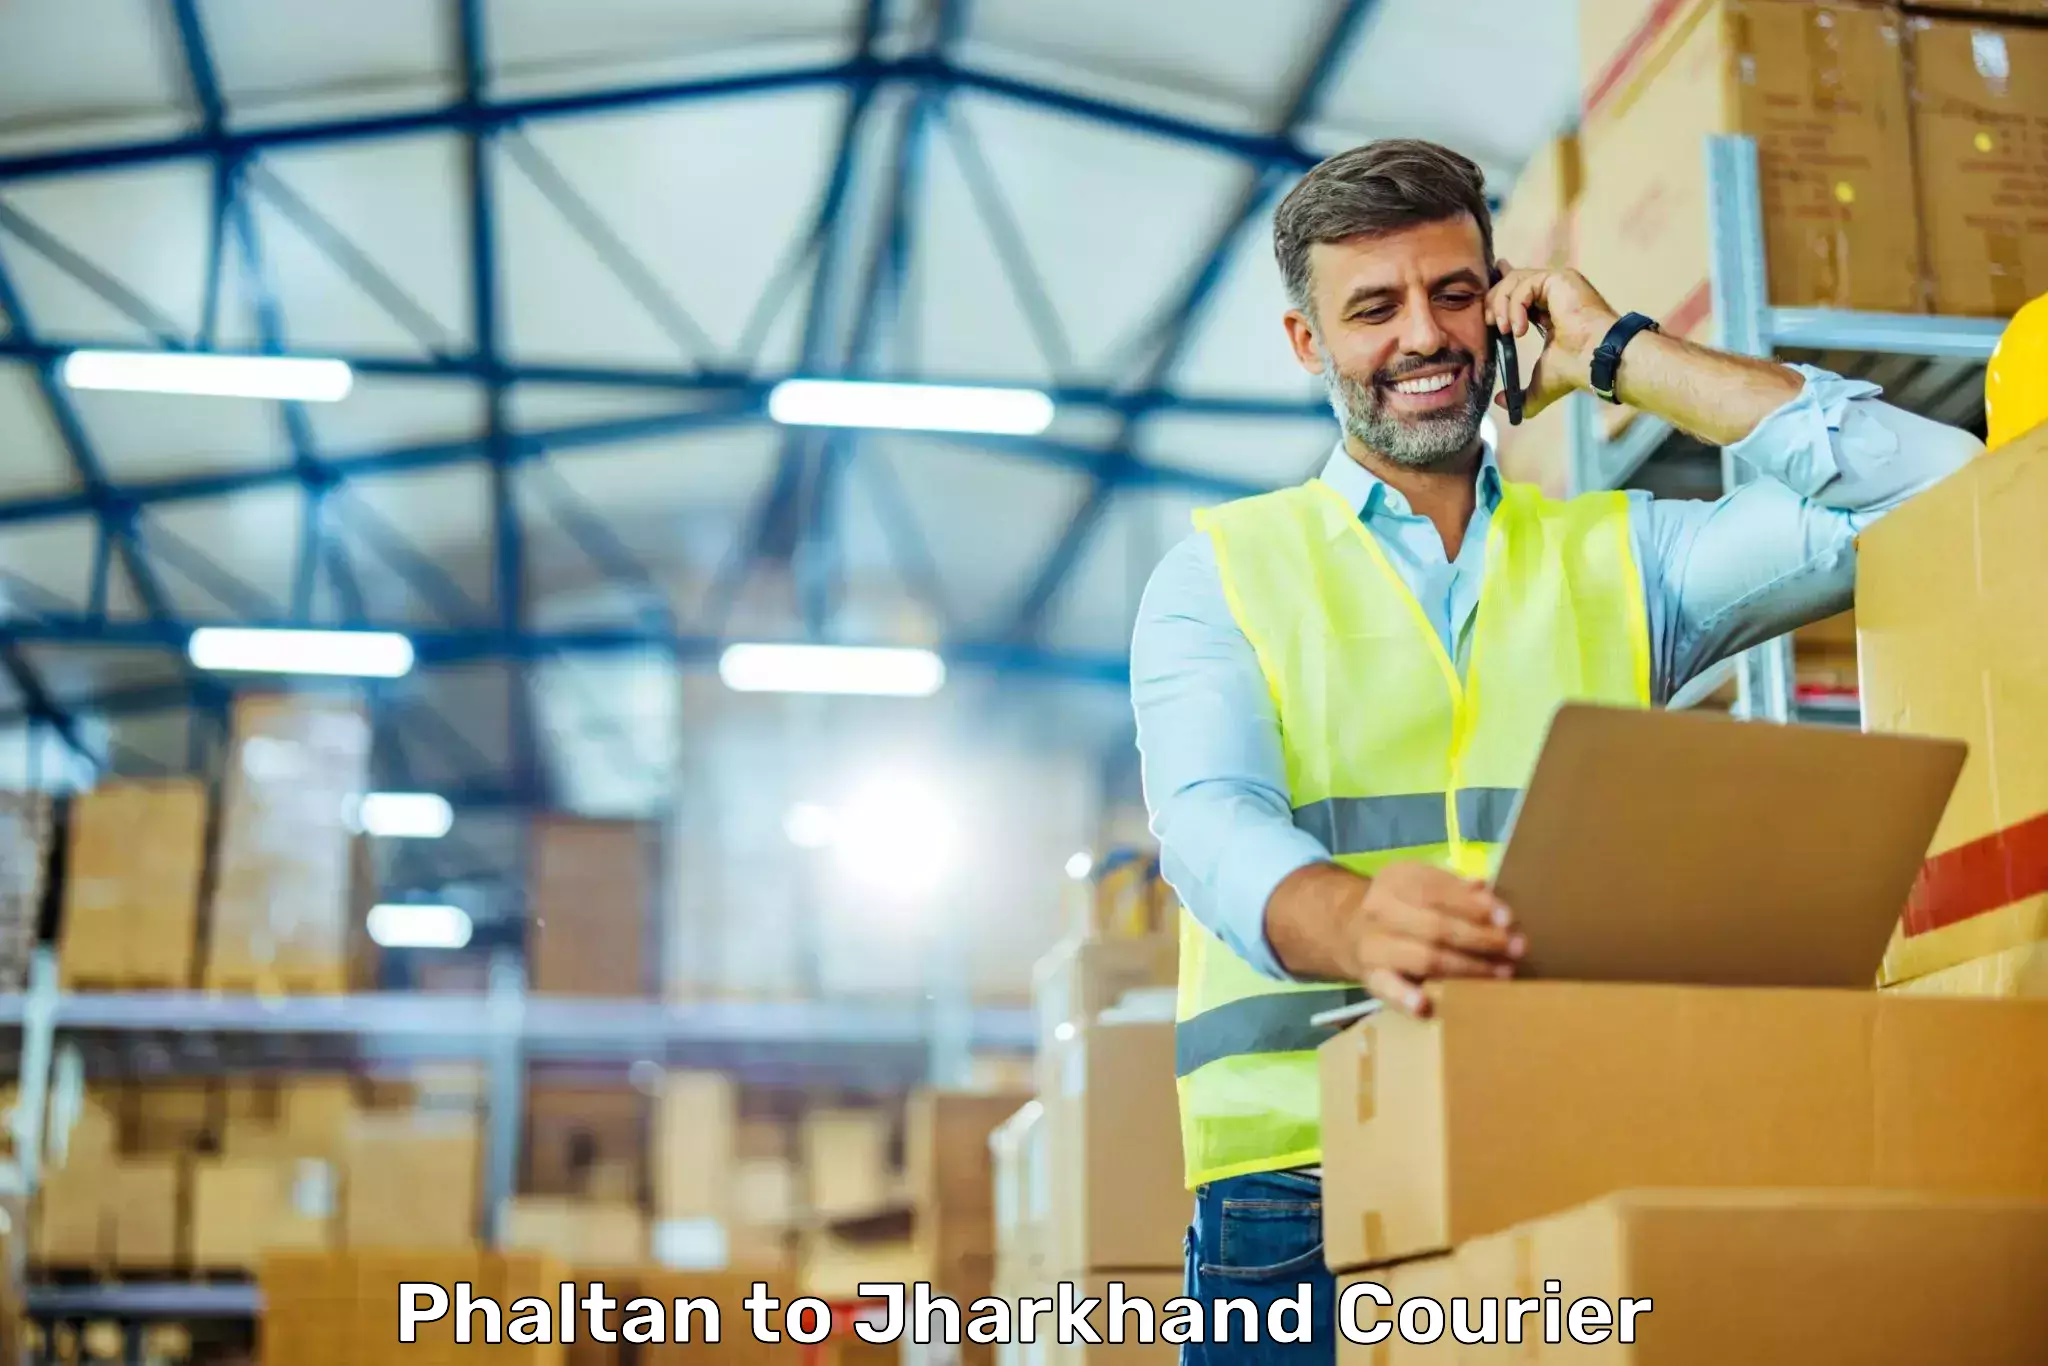 Speedy delivery service Phaltan to Jharkhand